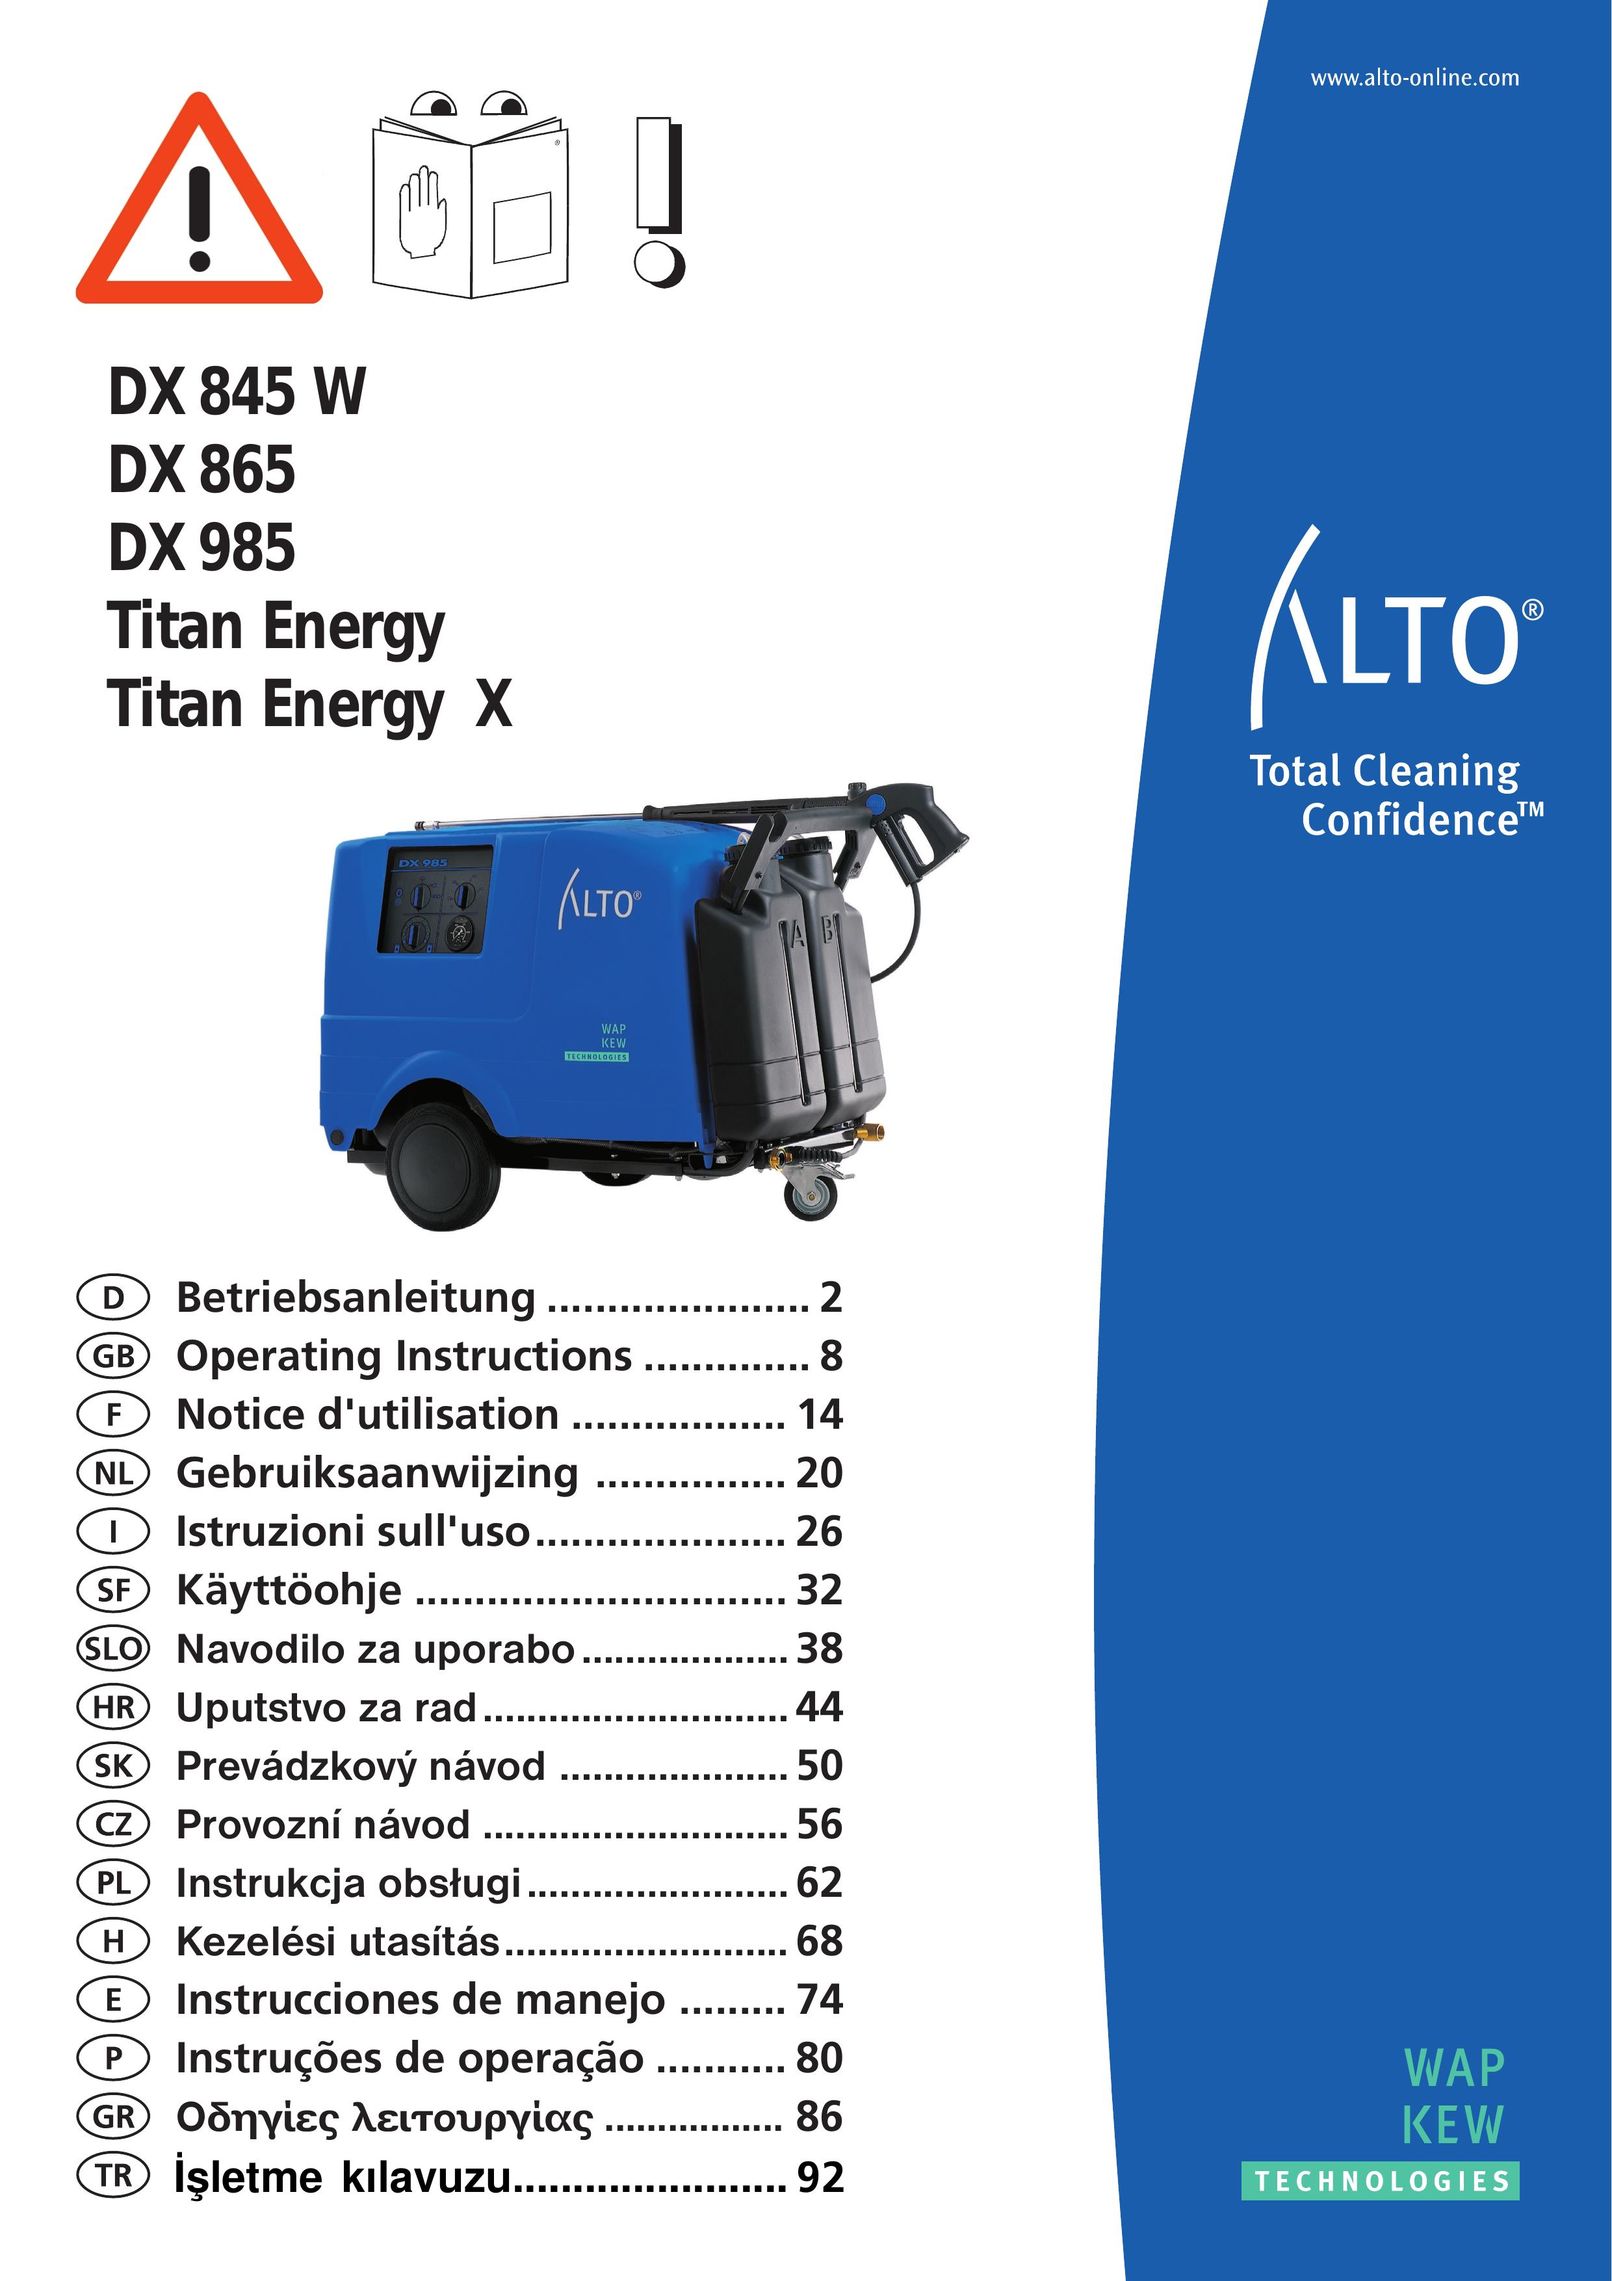 Alto-Shaam DX 845 W Vacuum Cleaner User Manual